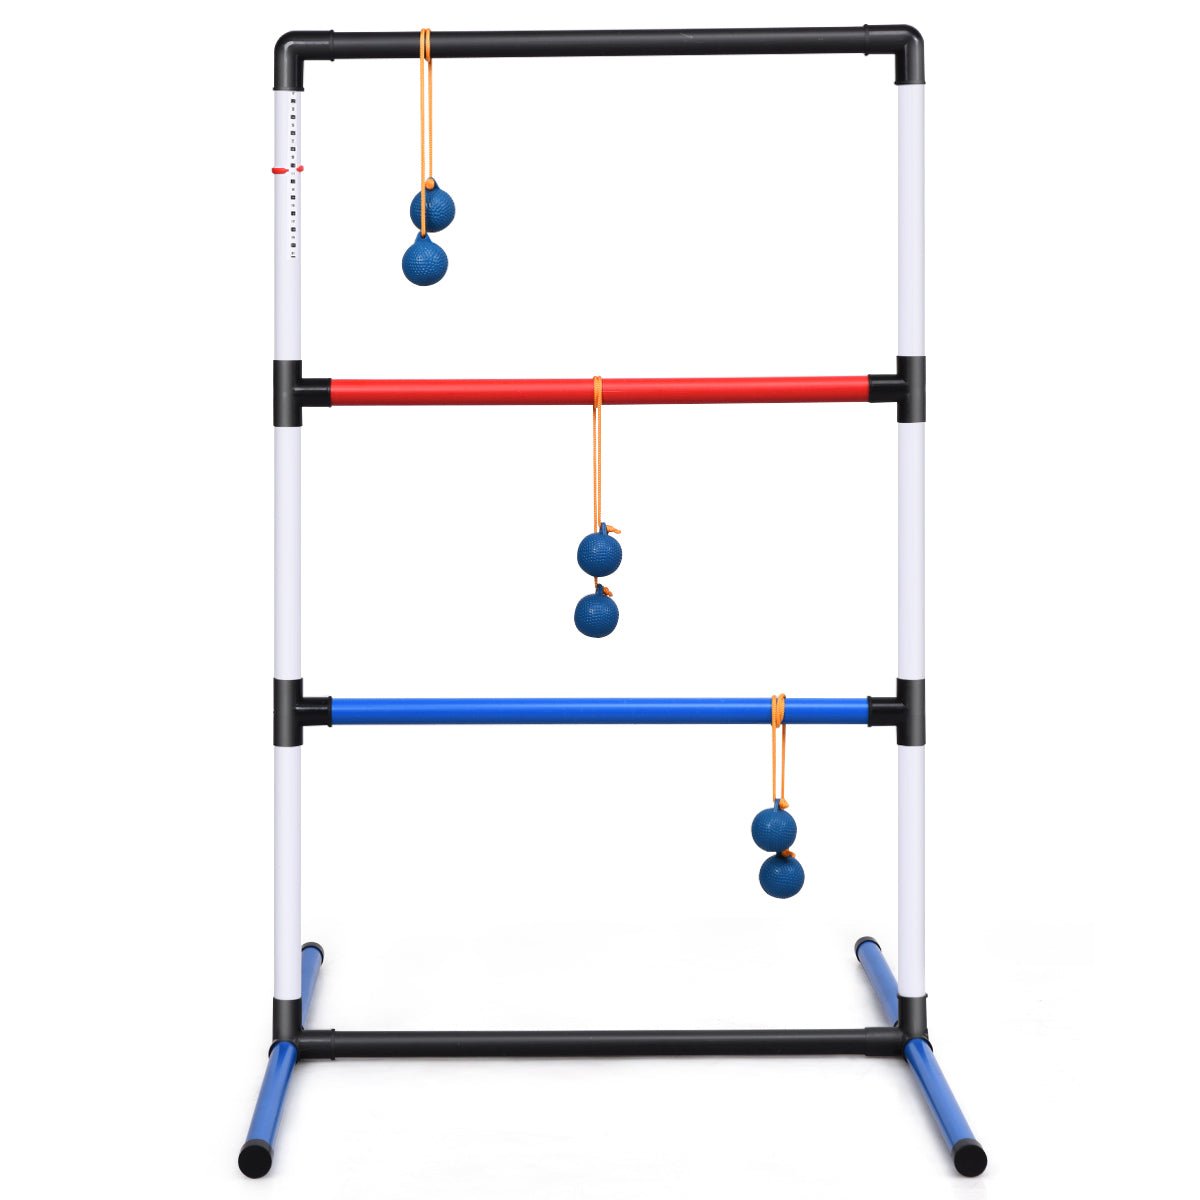 Ladder Toss Game Set - 6 PE Bolas Included for Fun Play